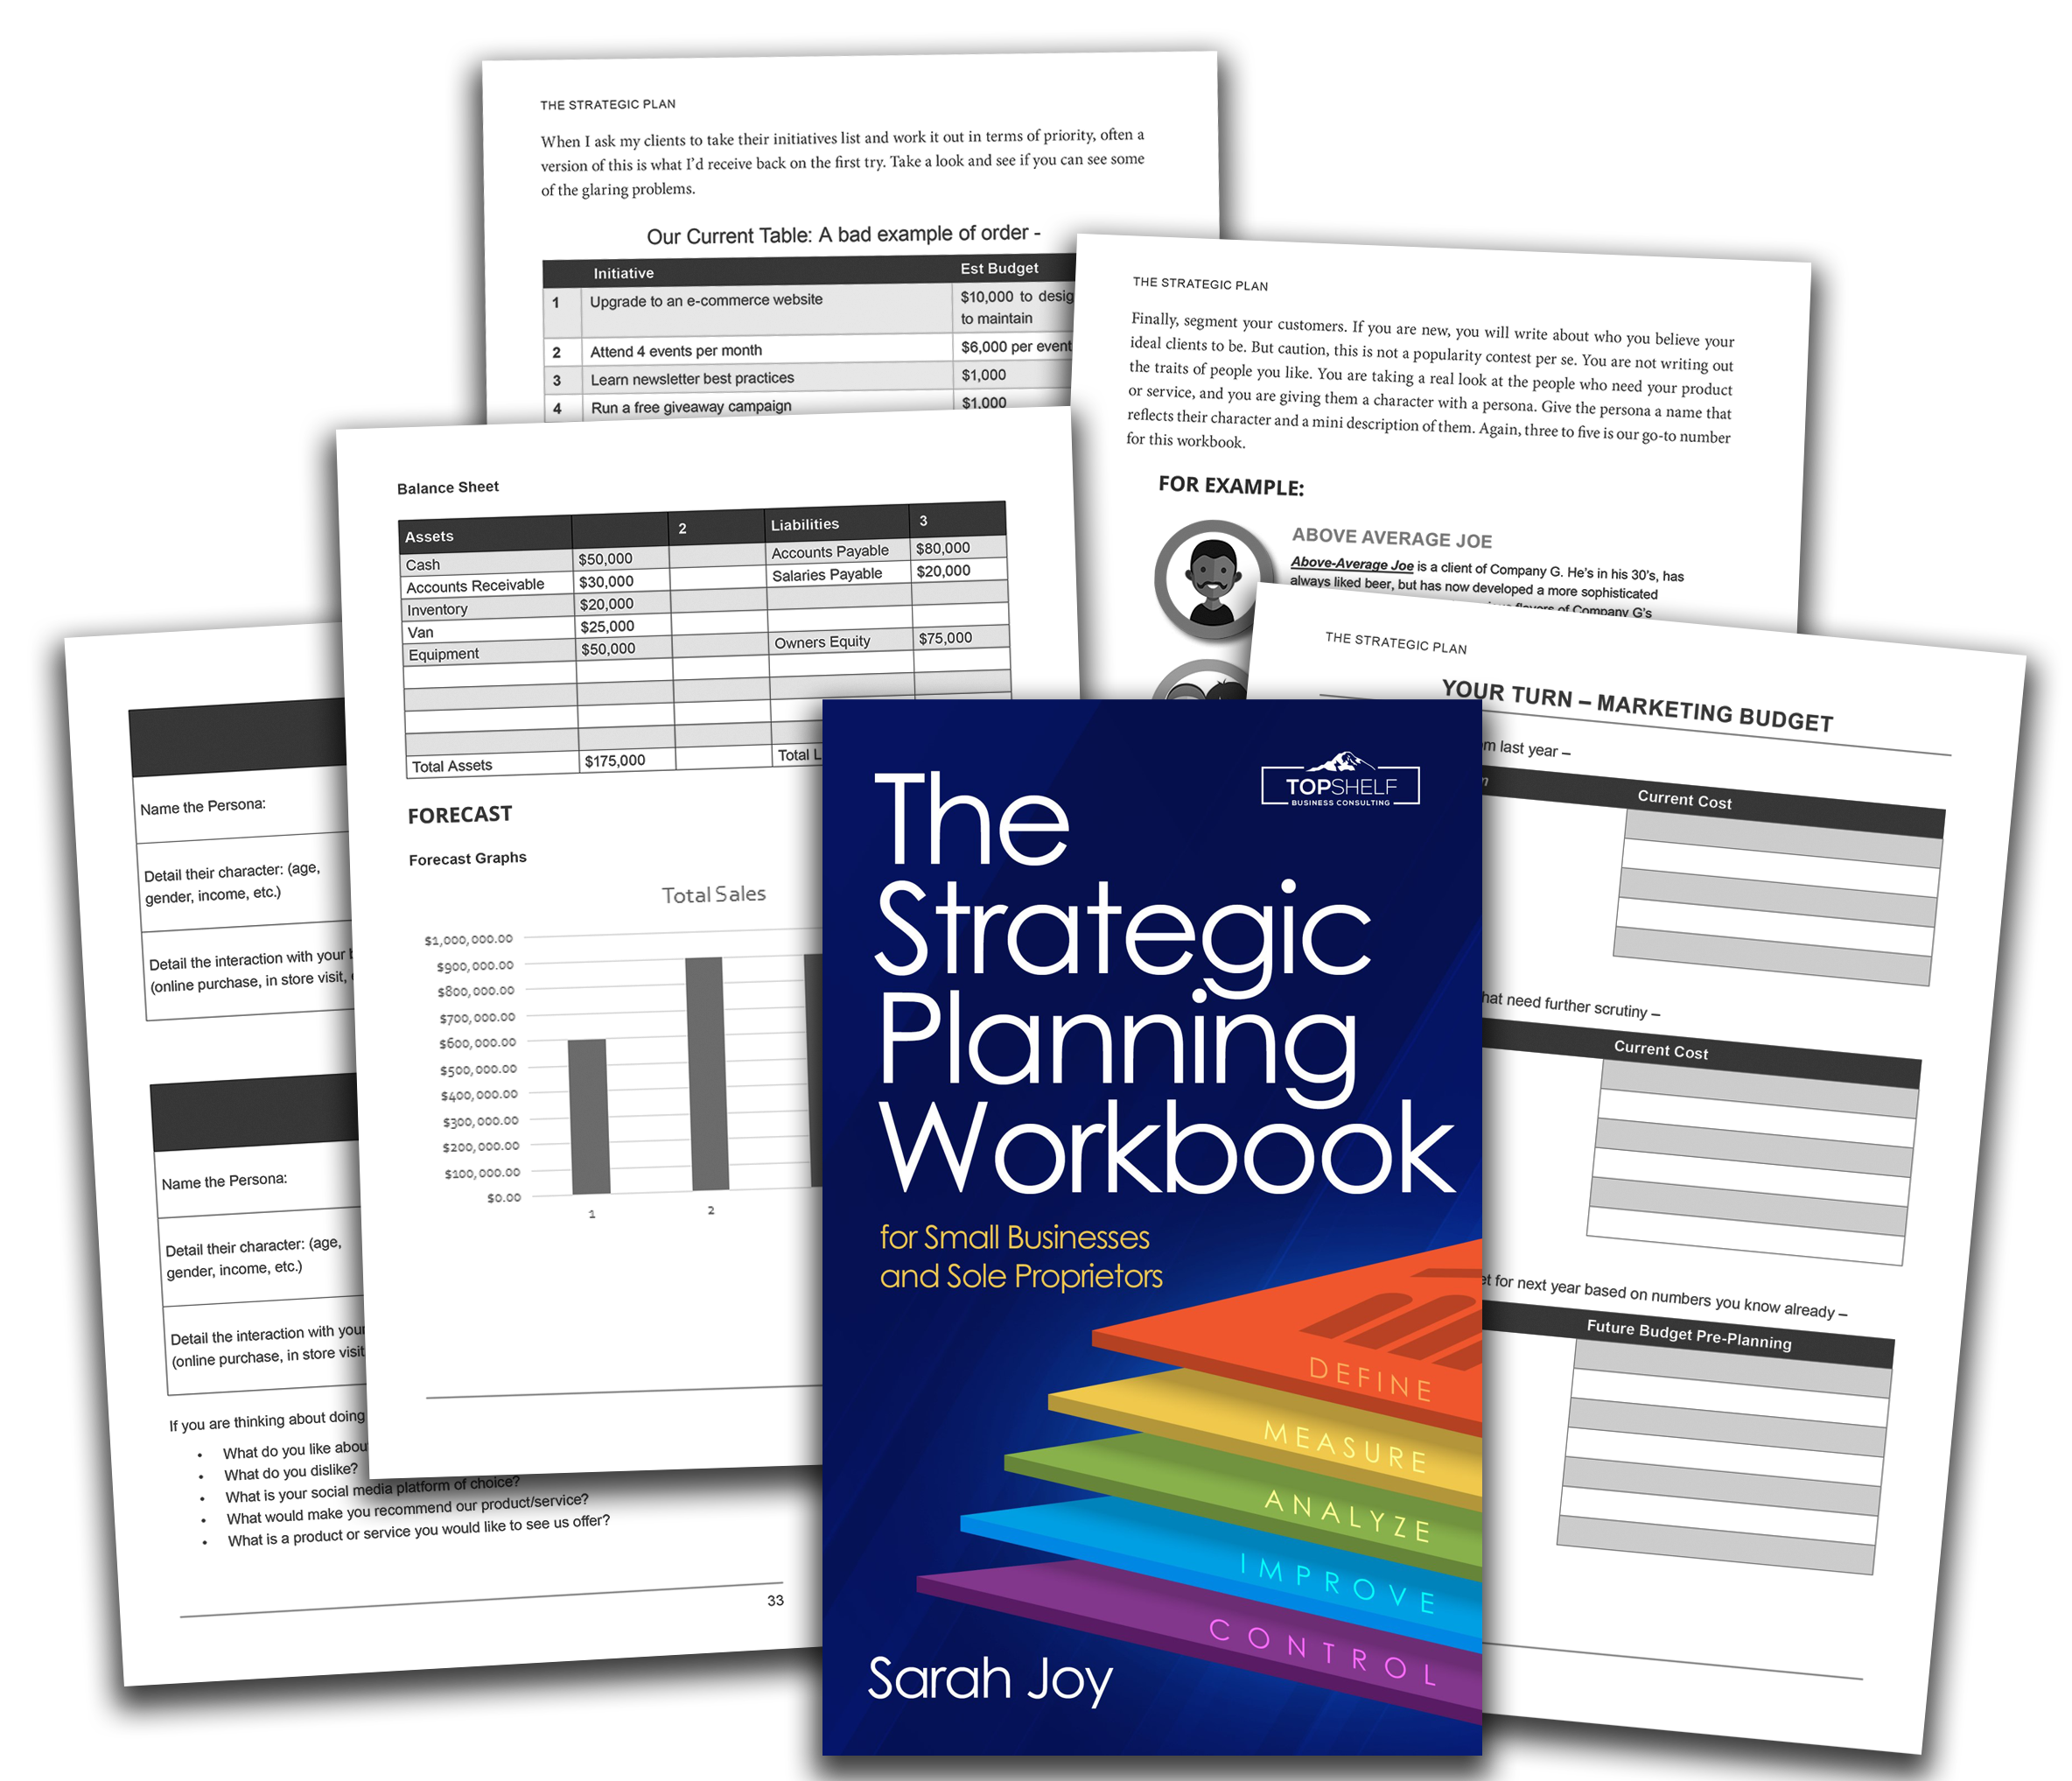 Worksheets for your small business planning process